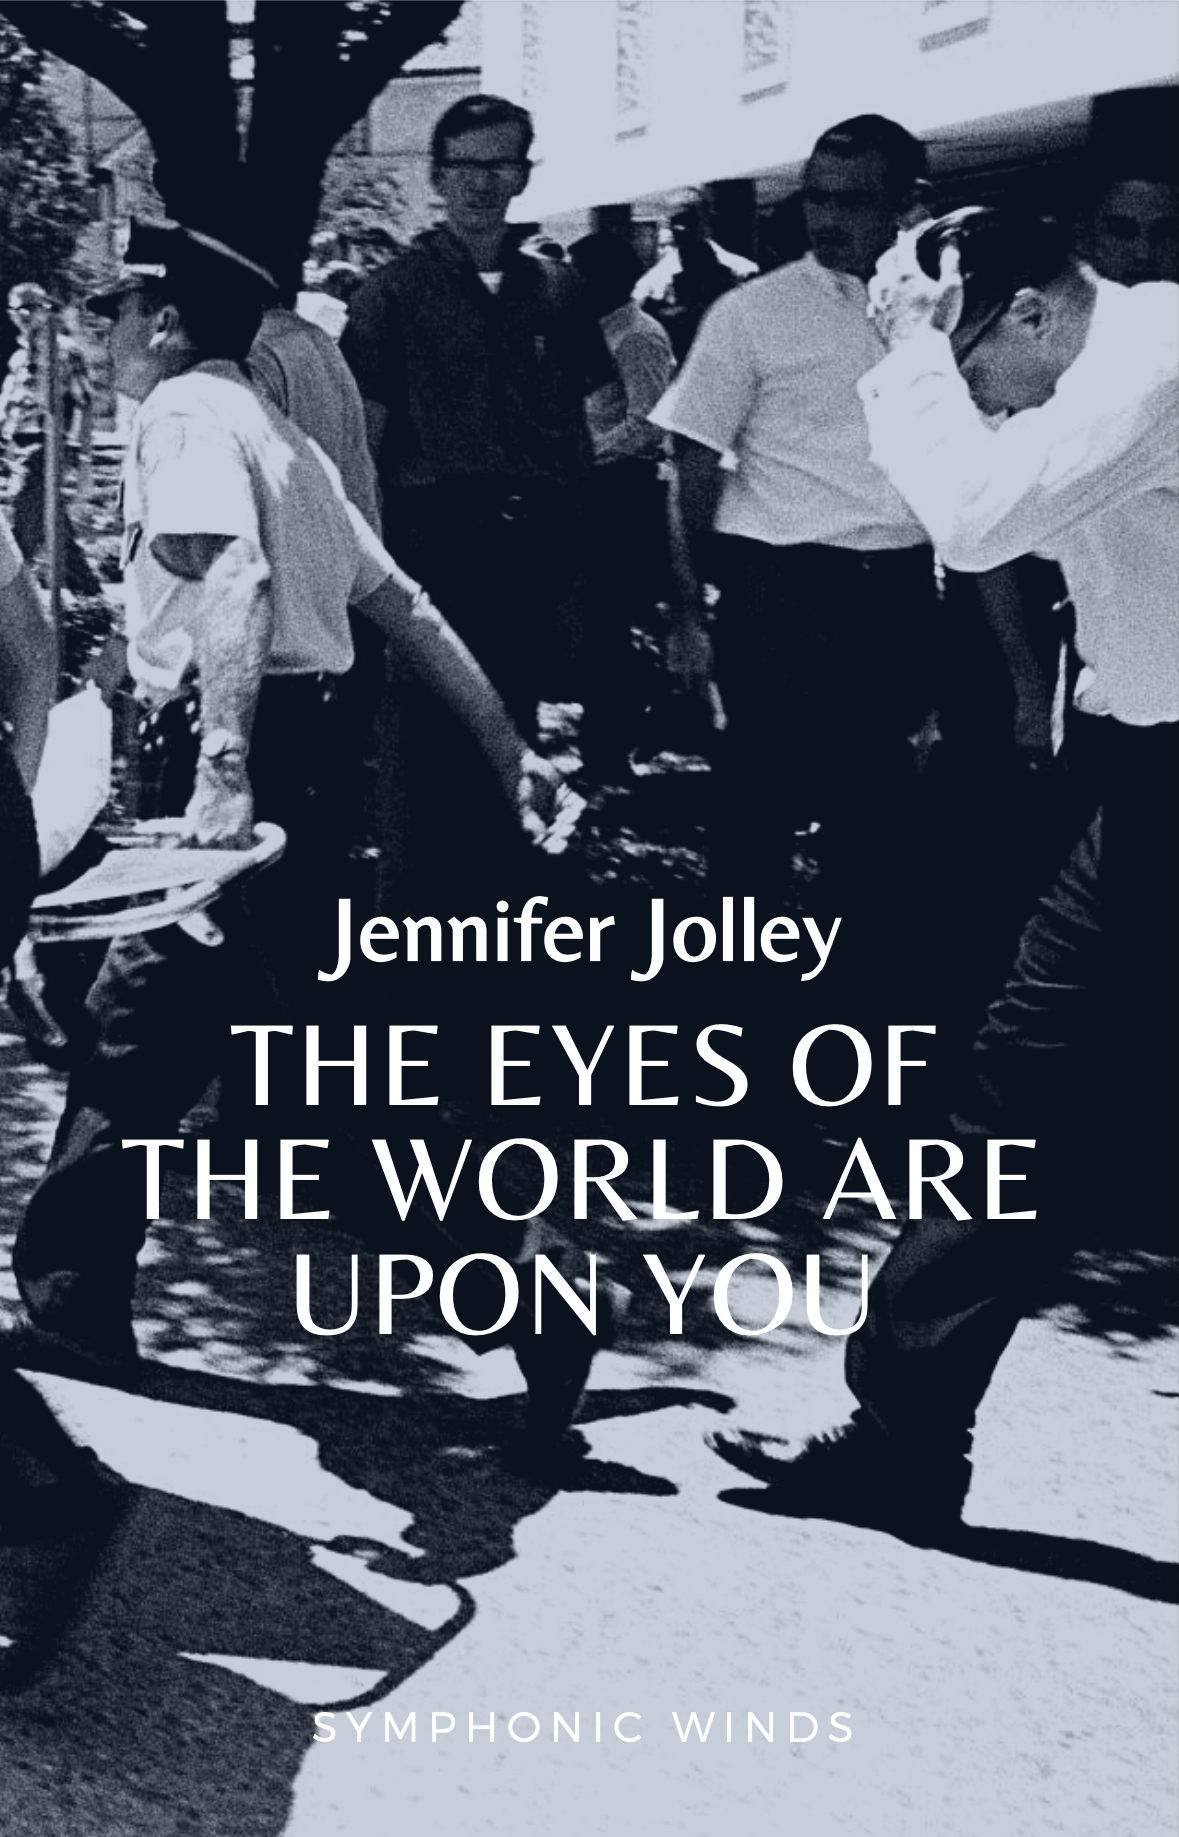 The Eyes Of The World Are Upon You (Score Only) by Jennifer Jolley